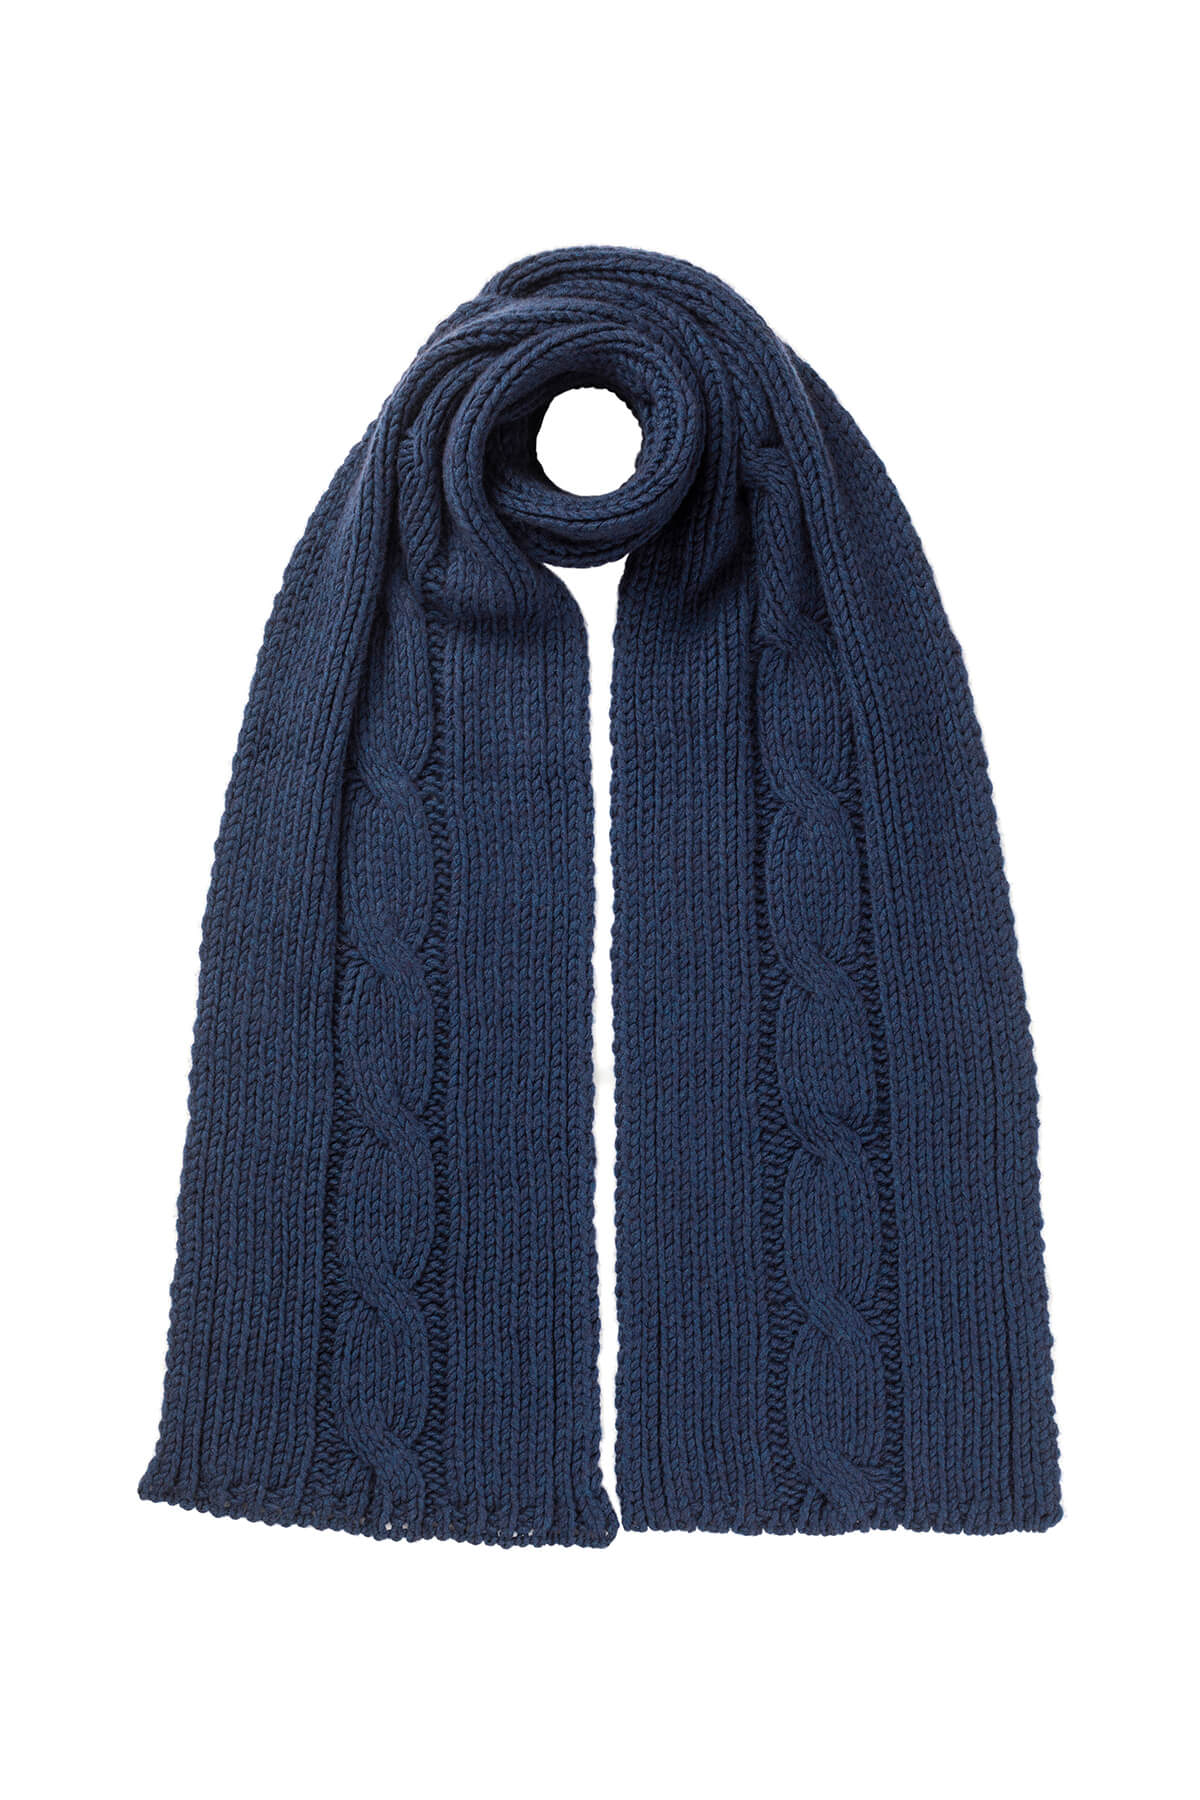 Johnstons of Elgin’s Ocean blue Luxe Chunky Cable Cashmere Scarf on a white background HAB03195HD7244